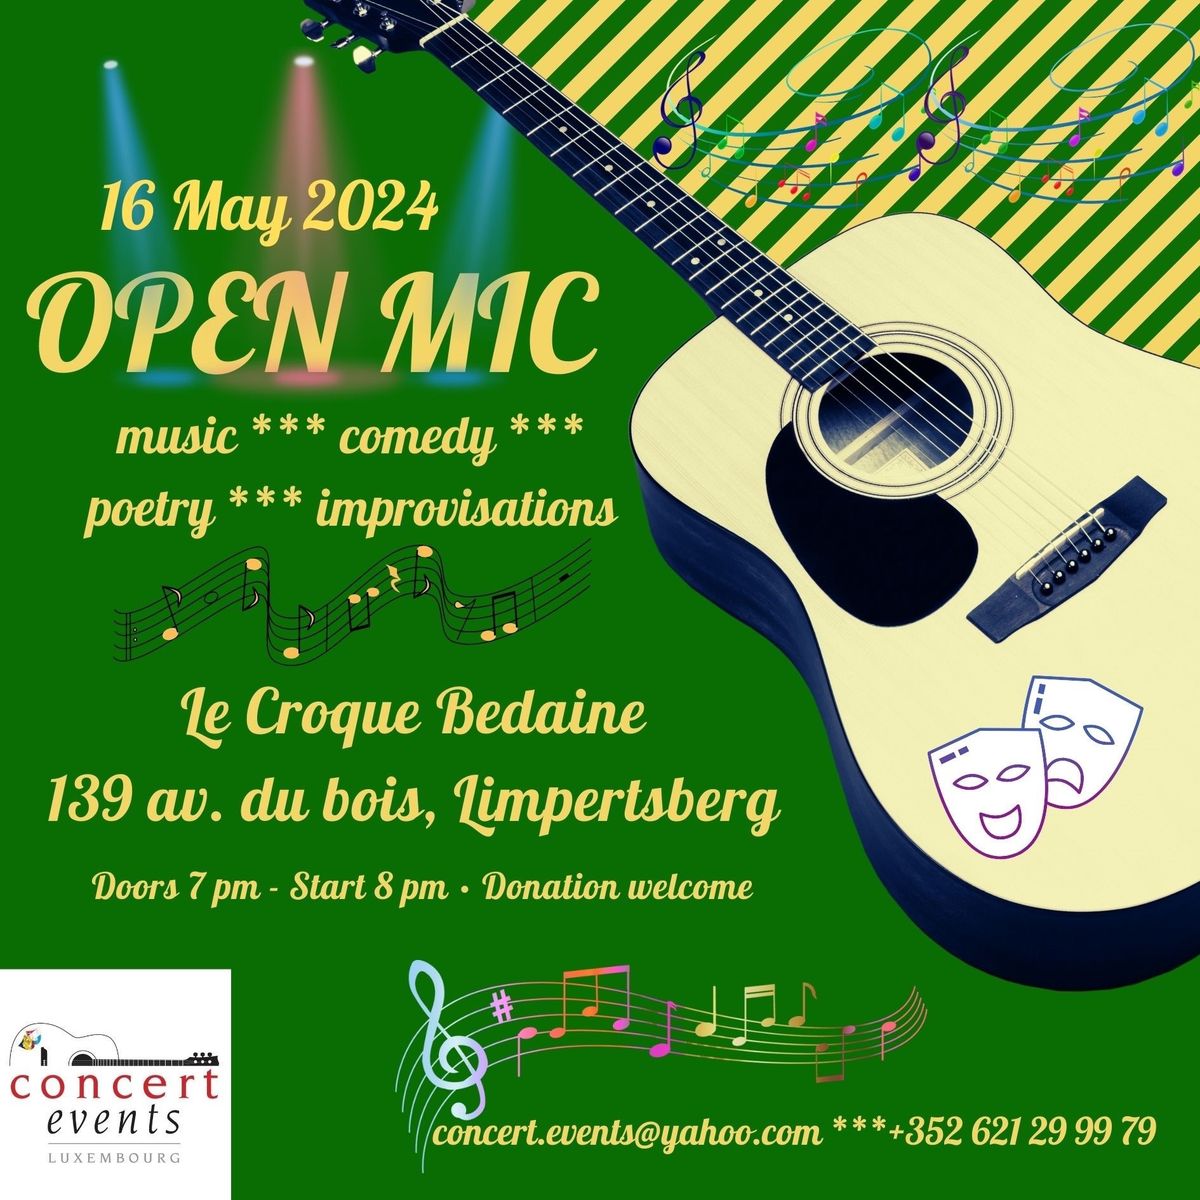 Open mic by Concert Events Luxemburg asbl